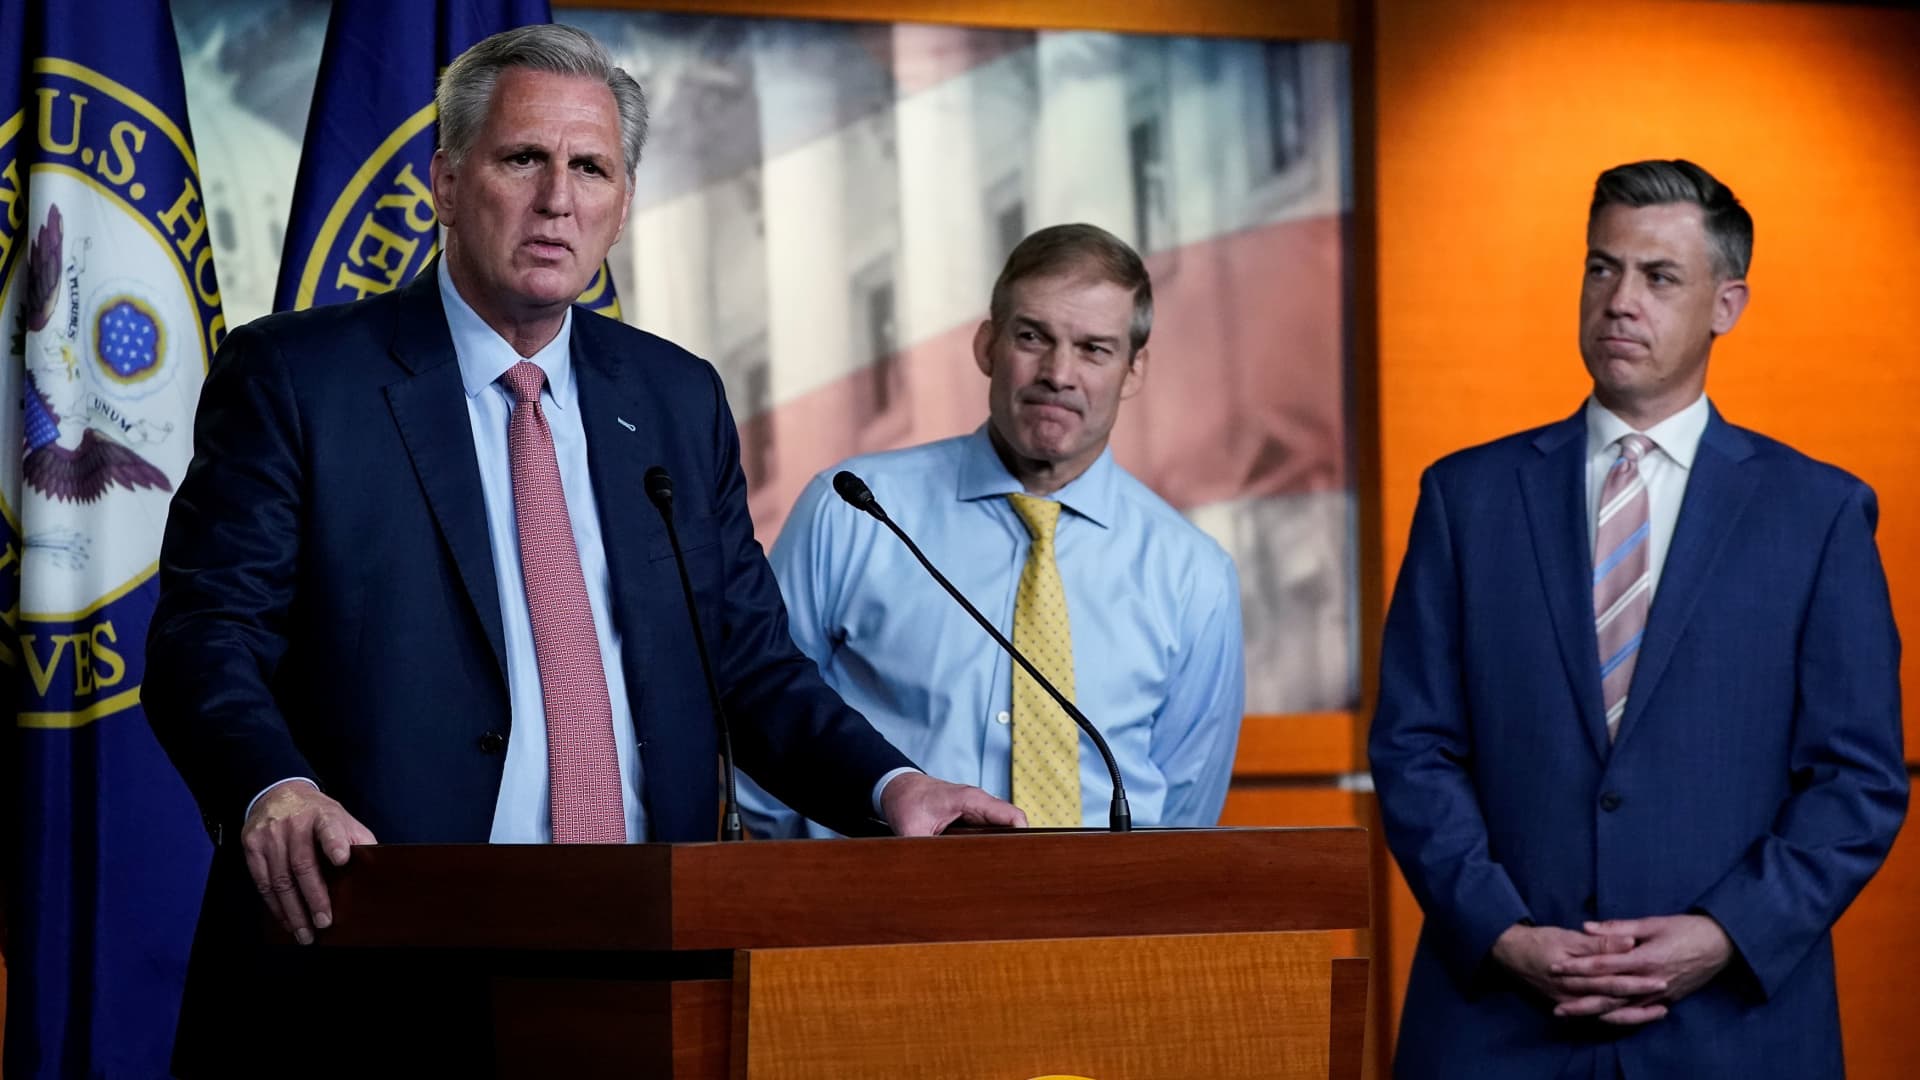 U.S. House Minority Leader Kevin McCarthy (R-CA) announces the withdrawal of his nominees to serve on the special committee probing the Jan. 6 attack on the Capitol, as two of the Republican nominees, Reps' Jim Jordan (R-OH) and Jim Banks (R-IN), standby during a news conference on Capitol Hill in Washington, July 21, 2021.